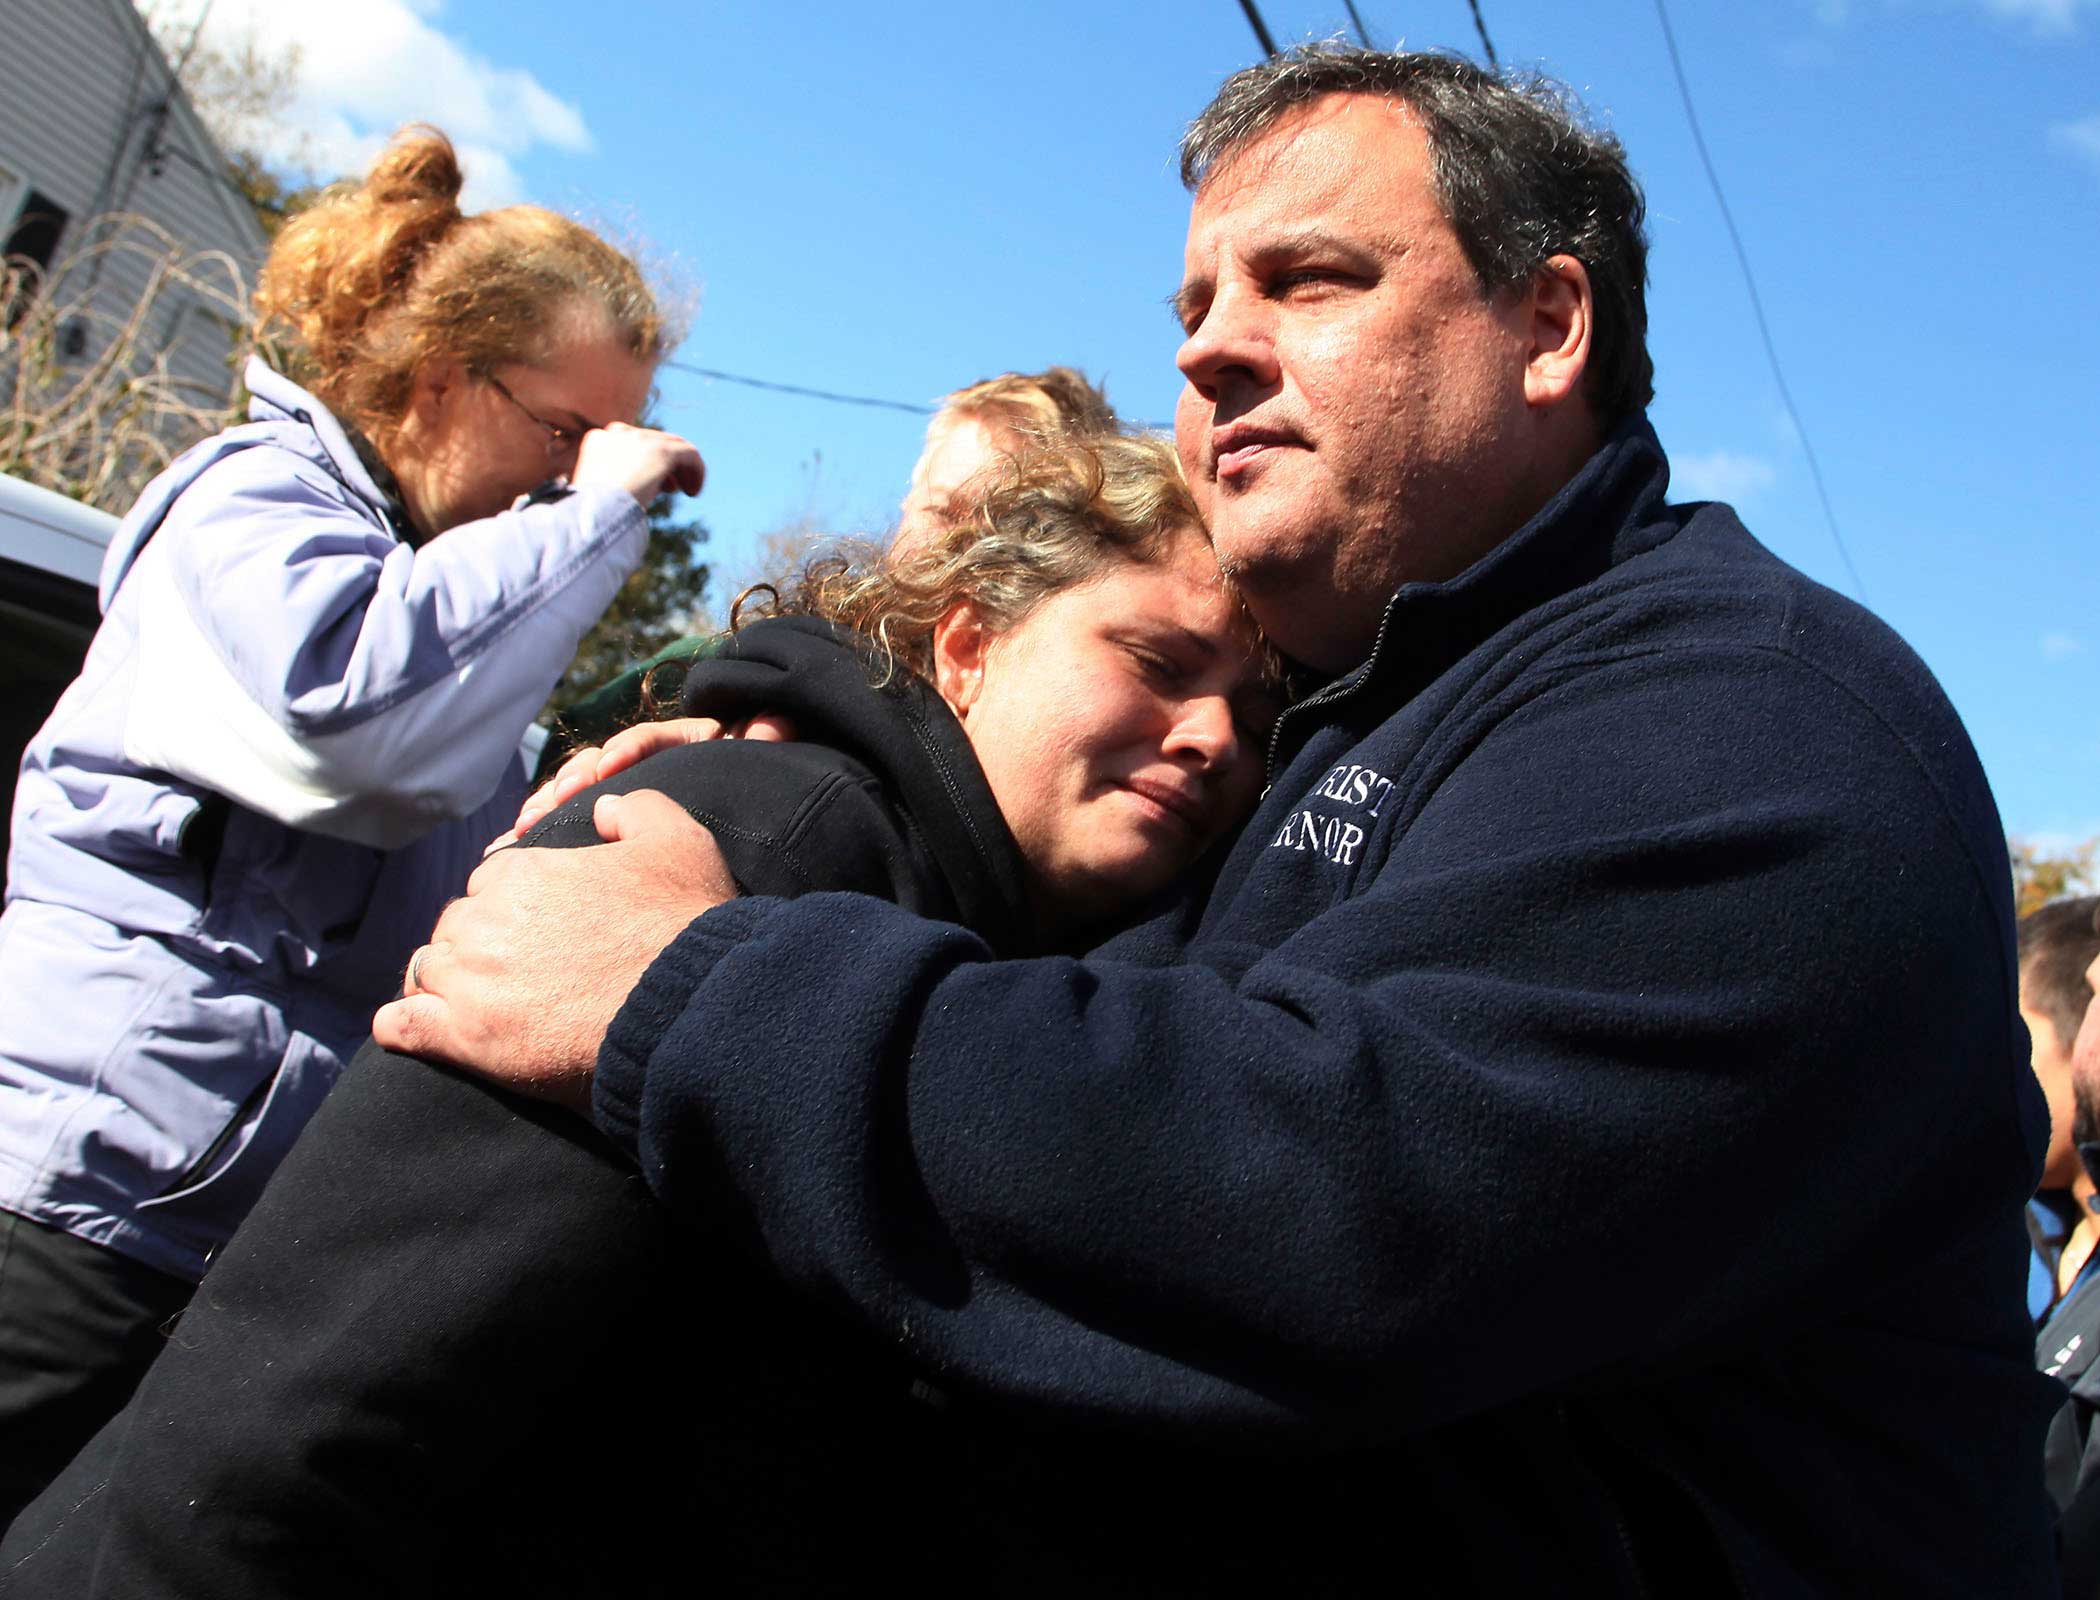 Governor Christie tours hurricane damage in Little Ferry